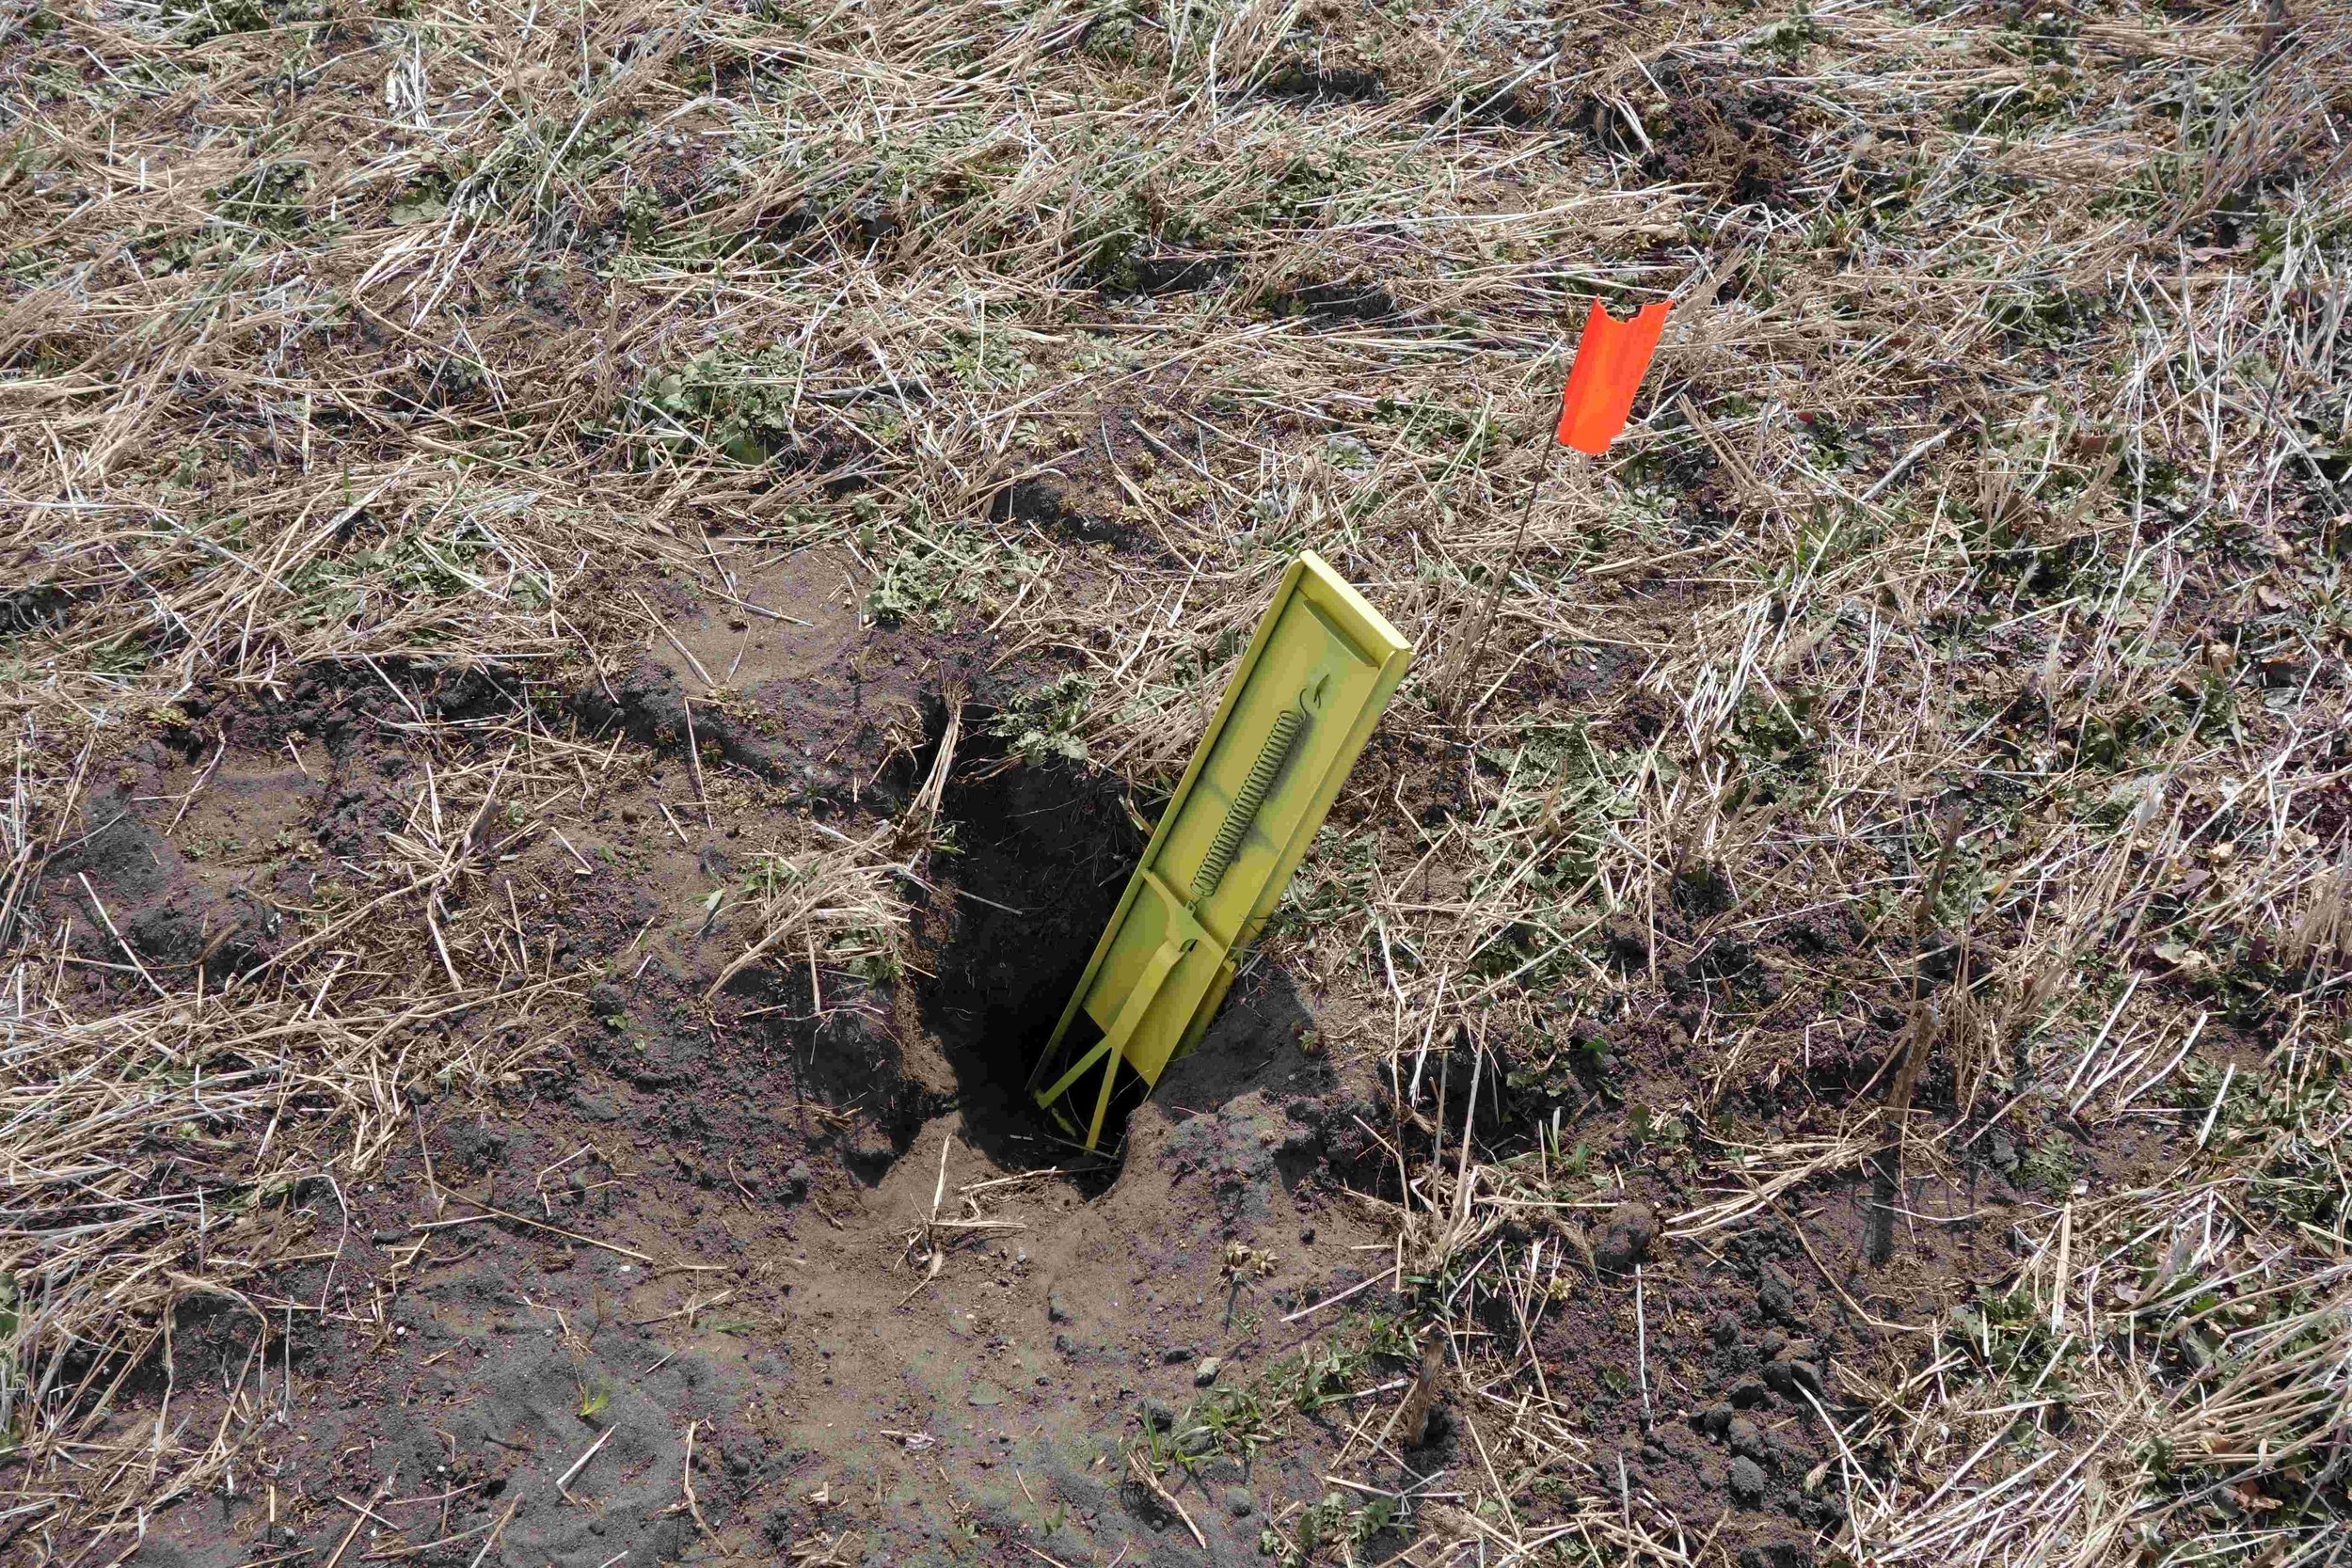 Gopher trap in a burrow entrance